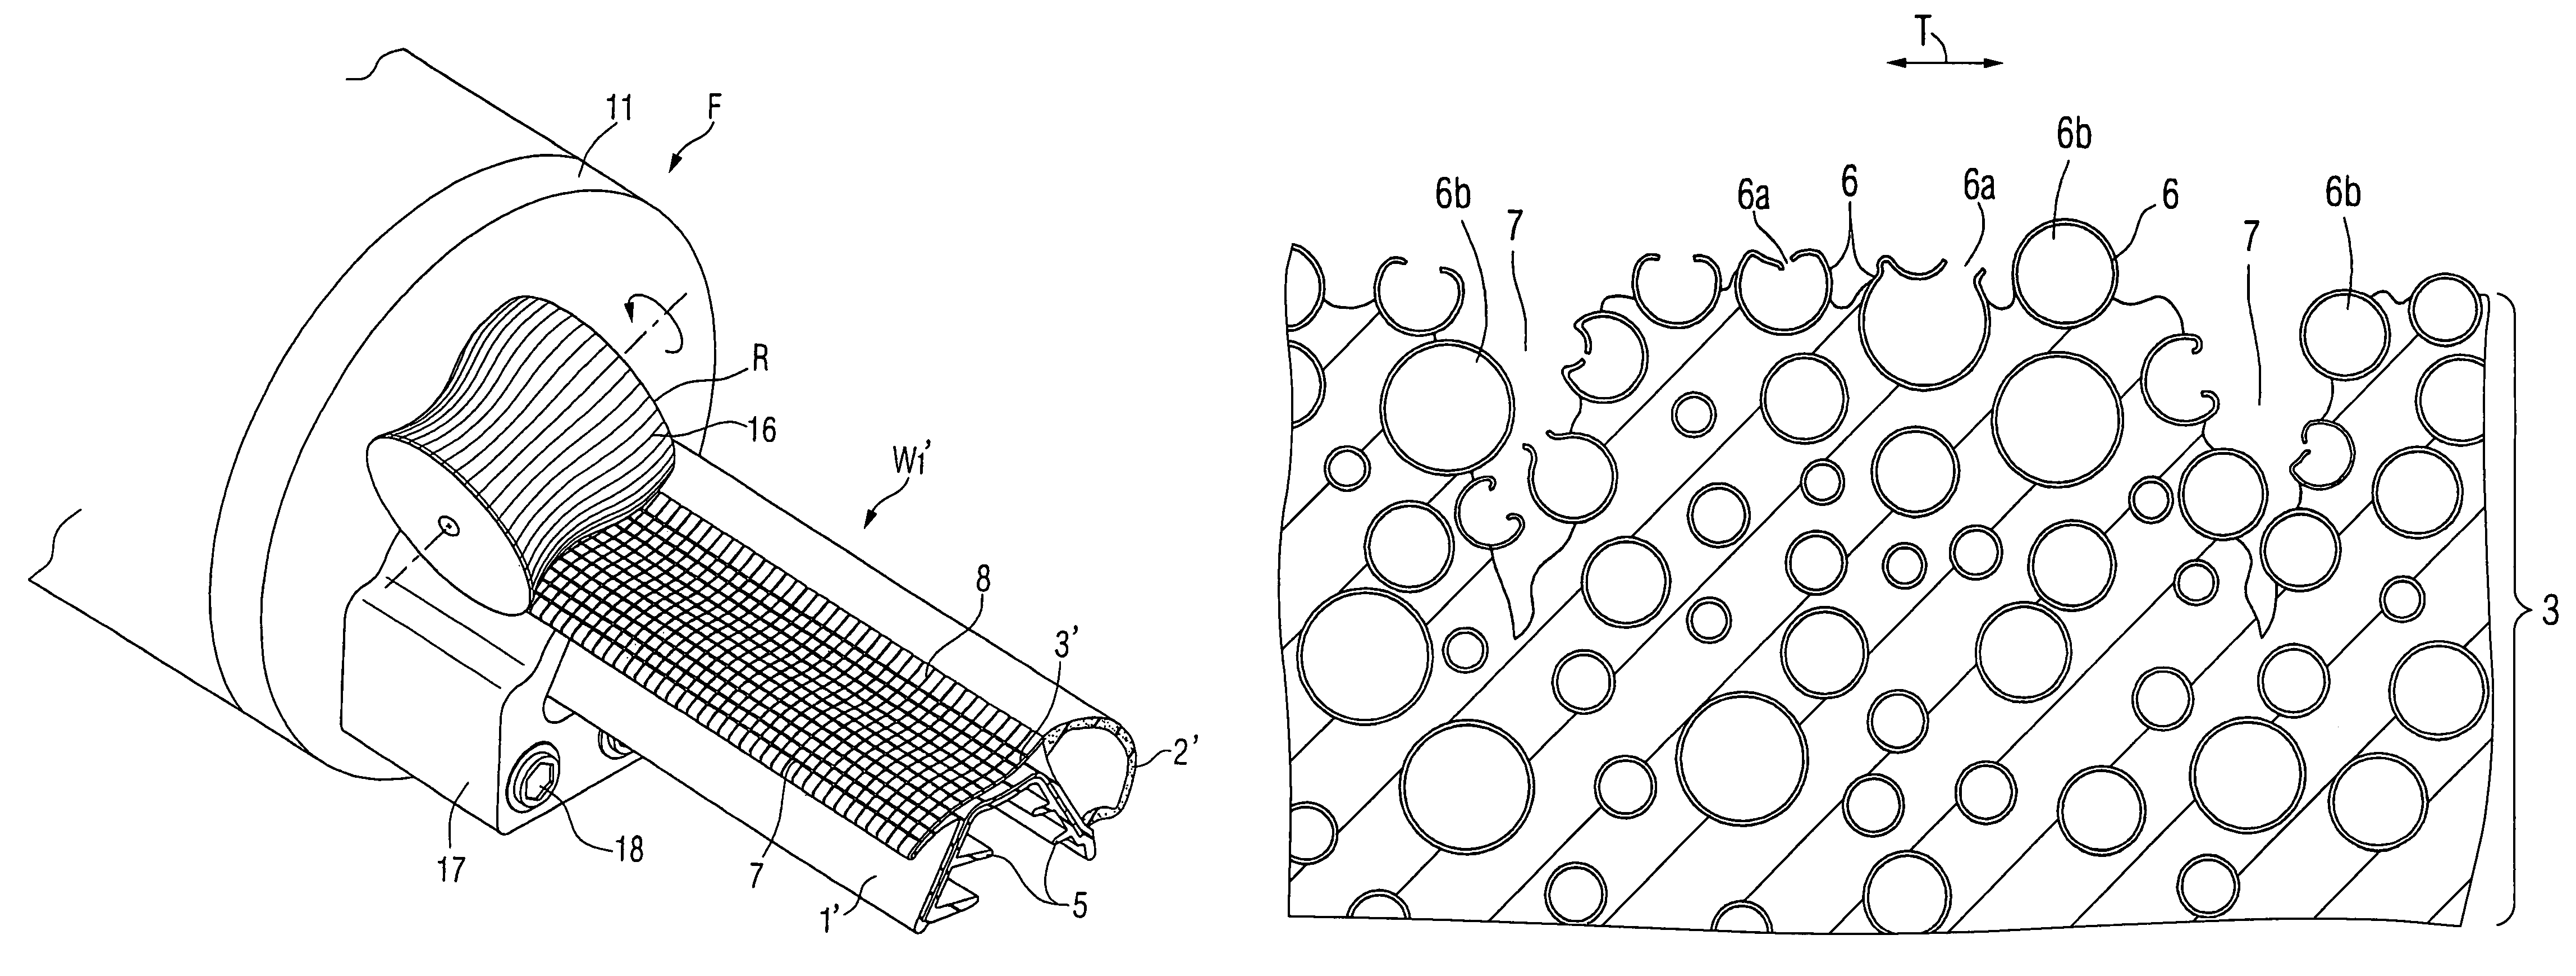 Long ornament member and method for manufacturing the same